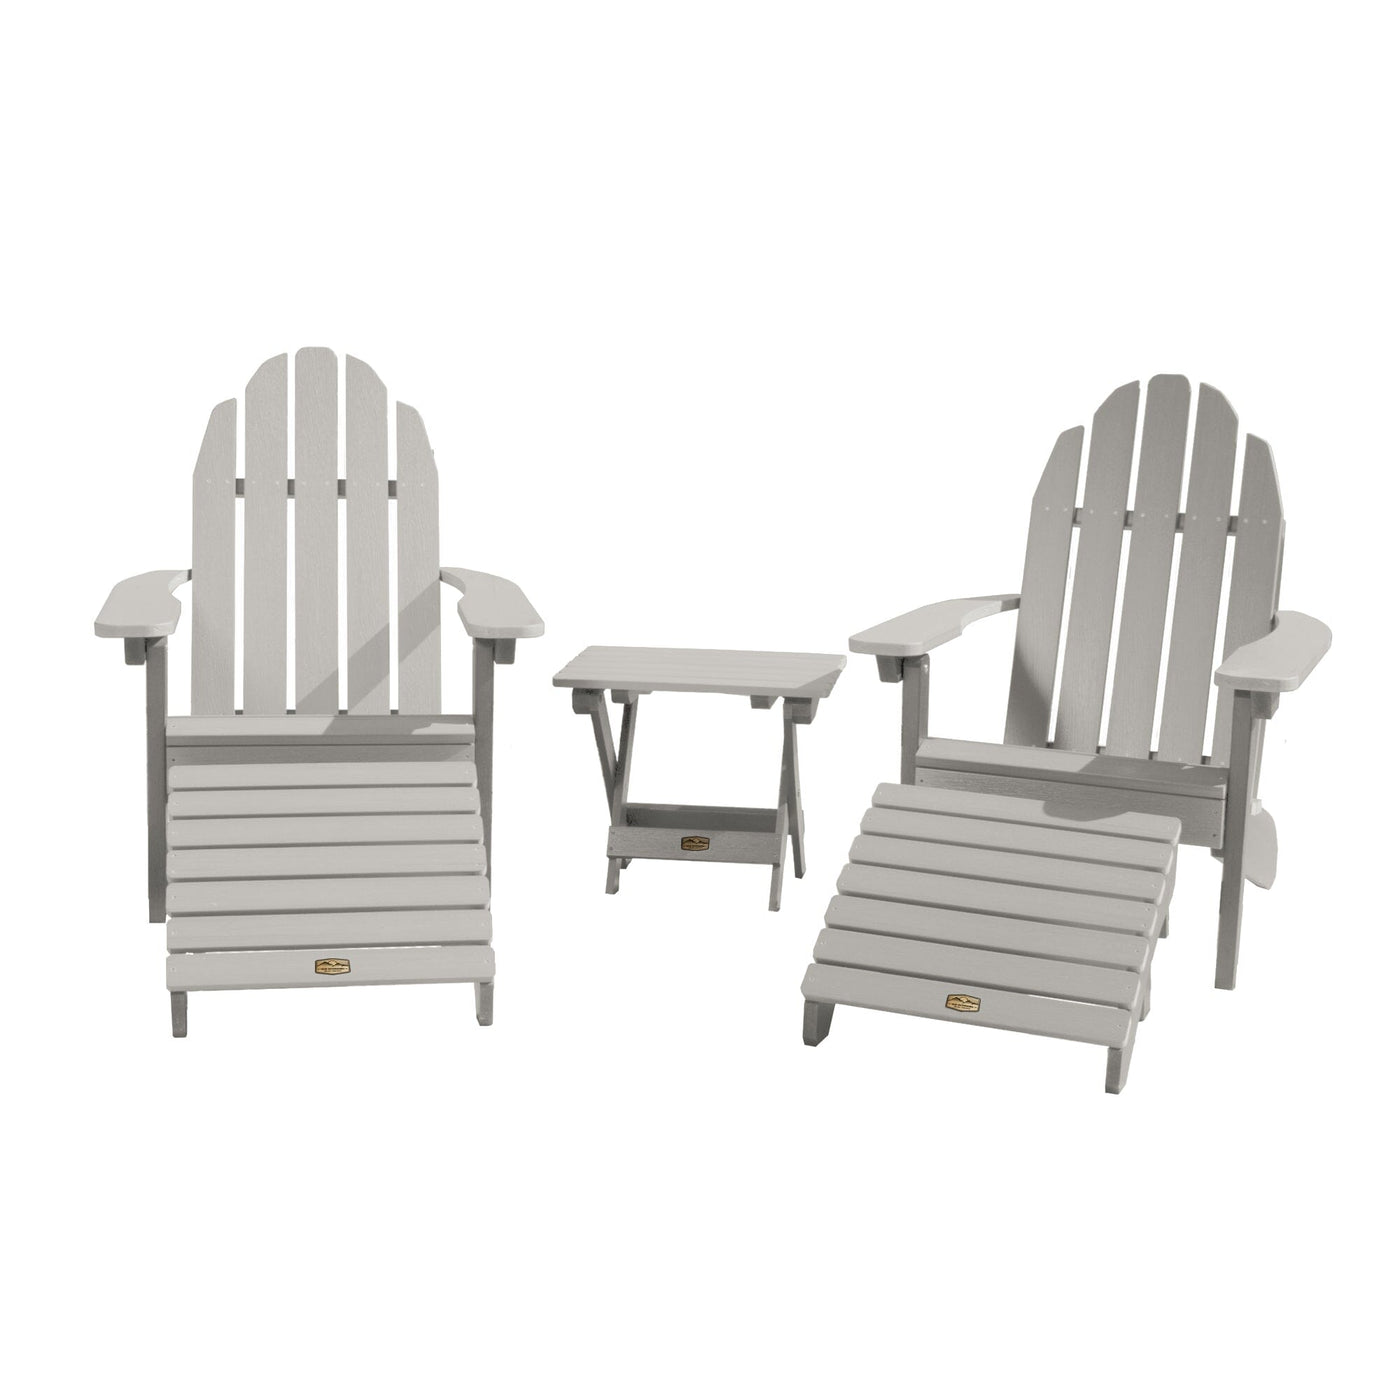 2 Essential Adirondack Chairs with Folding Side Table & 2 Folding Ottomans Kitted Sets ELK OUTDOORS® Harbor Gray 